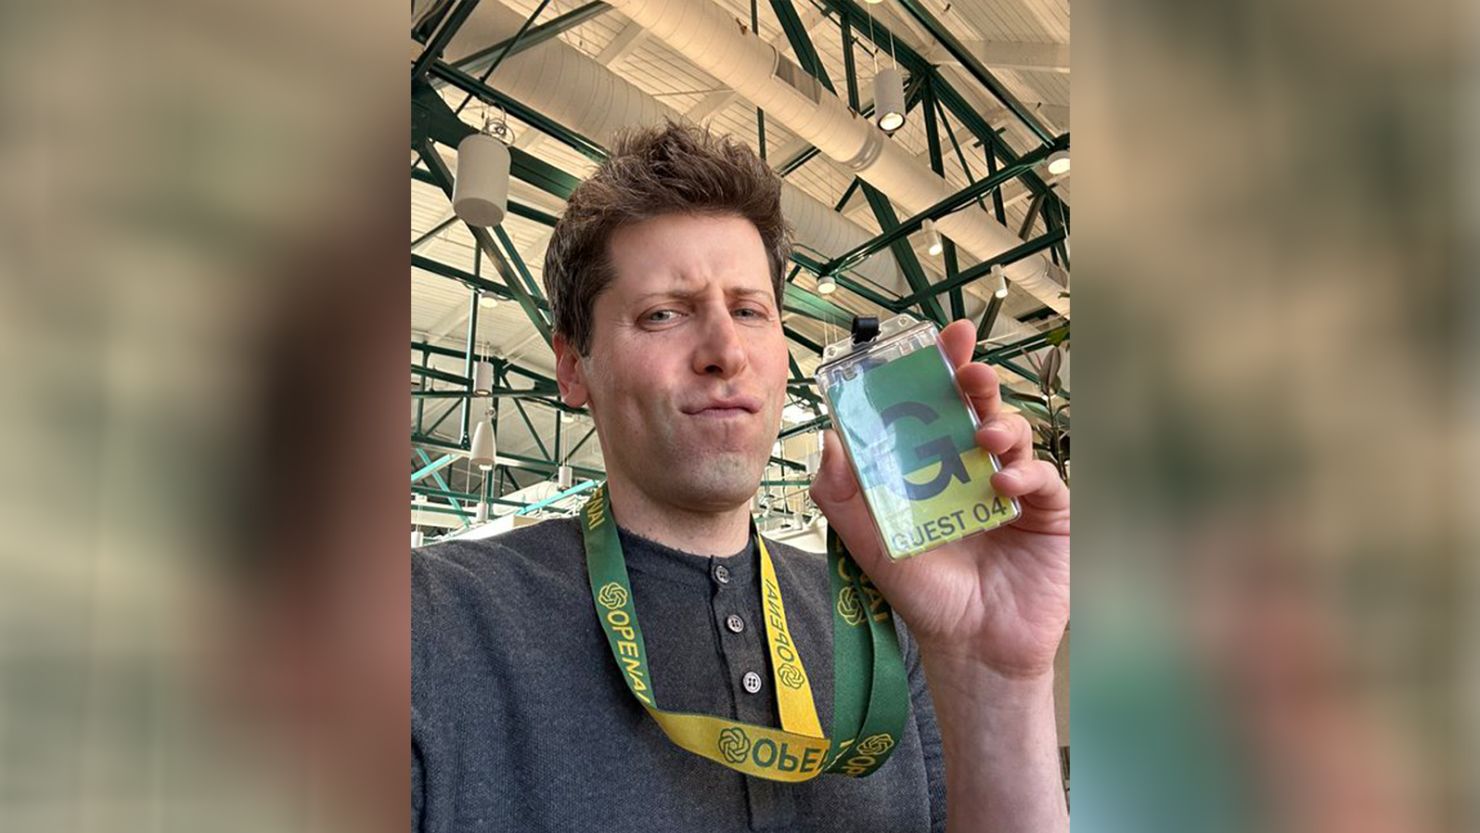 CEO Sam Altman posted a photo on X of himself holding what appeared to be a guest badge for the company's office, with the caption "first and last time i ever wear one of these."